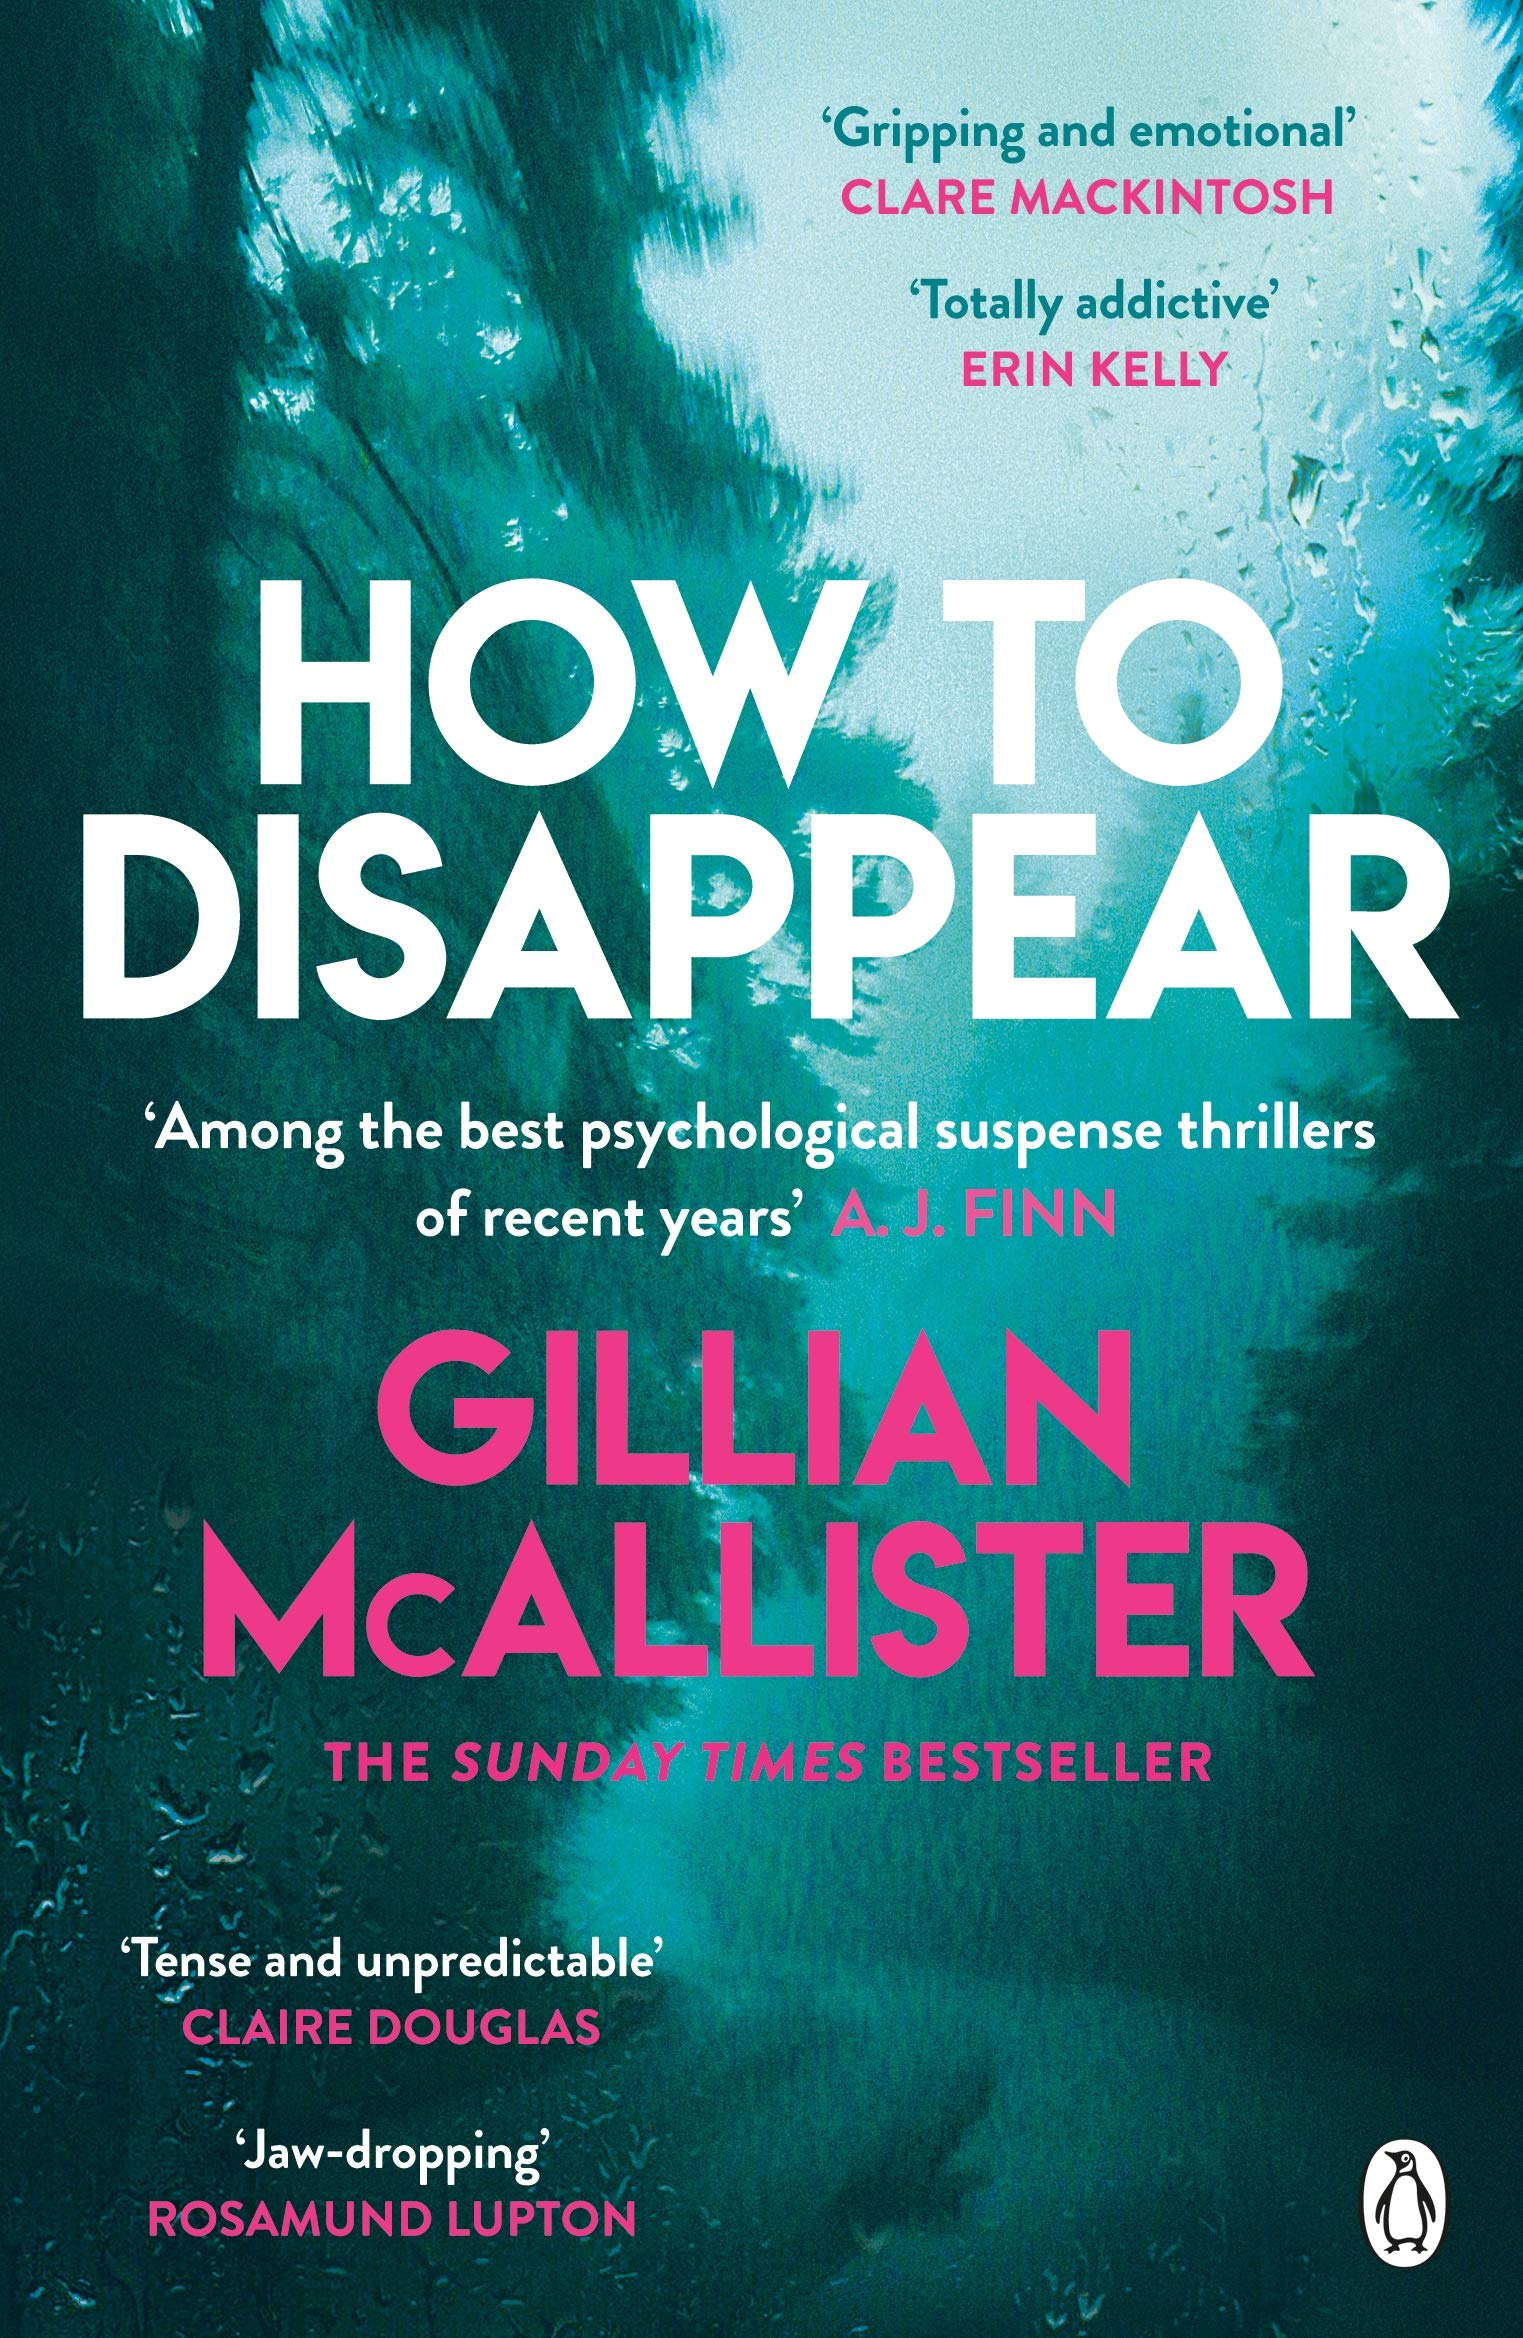 How to Disappear by Gillian McAllister, one of the best books out in July 2020